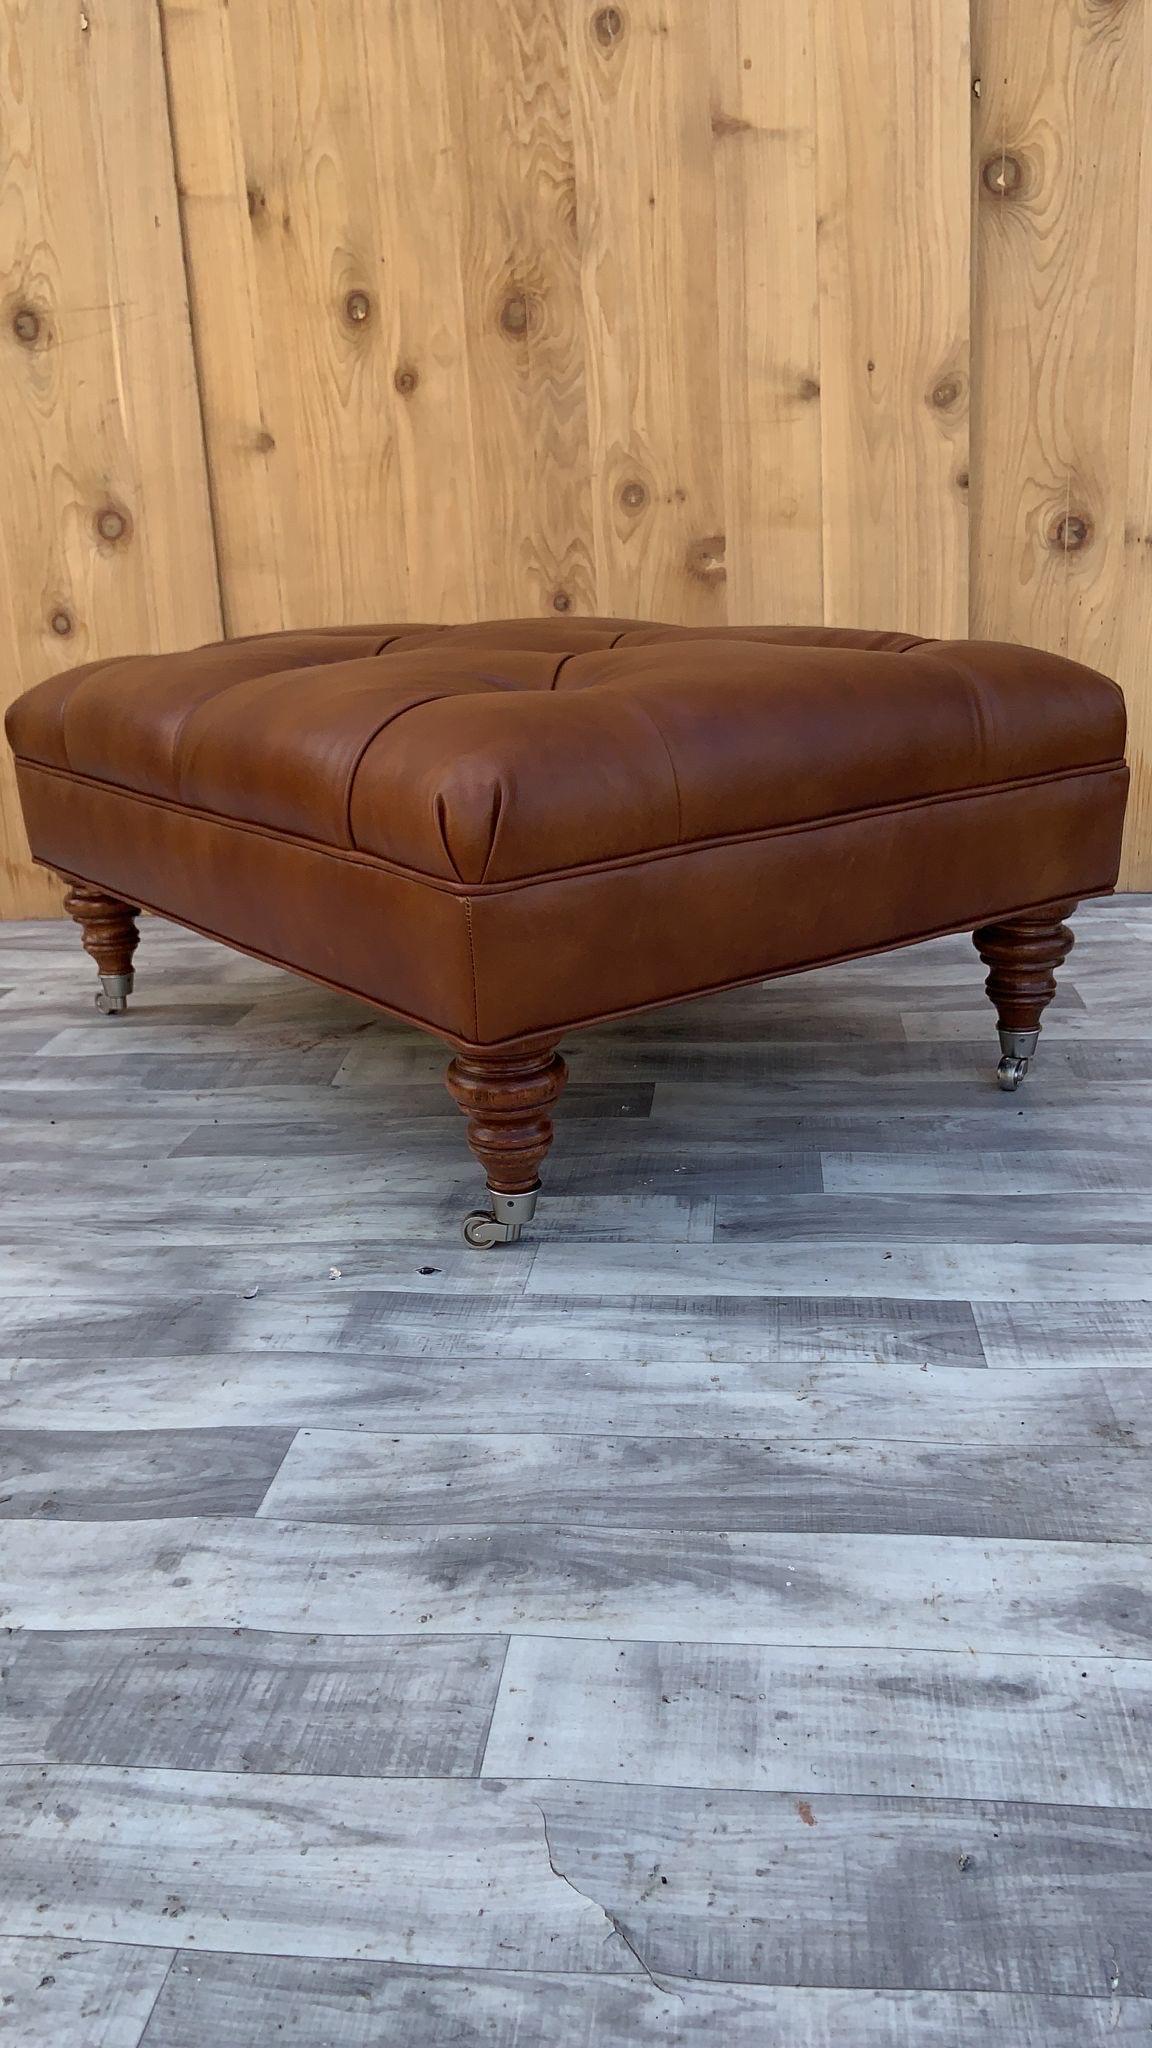 Vintage English Chesterfield Style Leather Tufted Ottoman In Good Condition For Sale In Chicago, IL